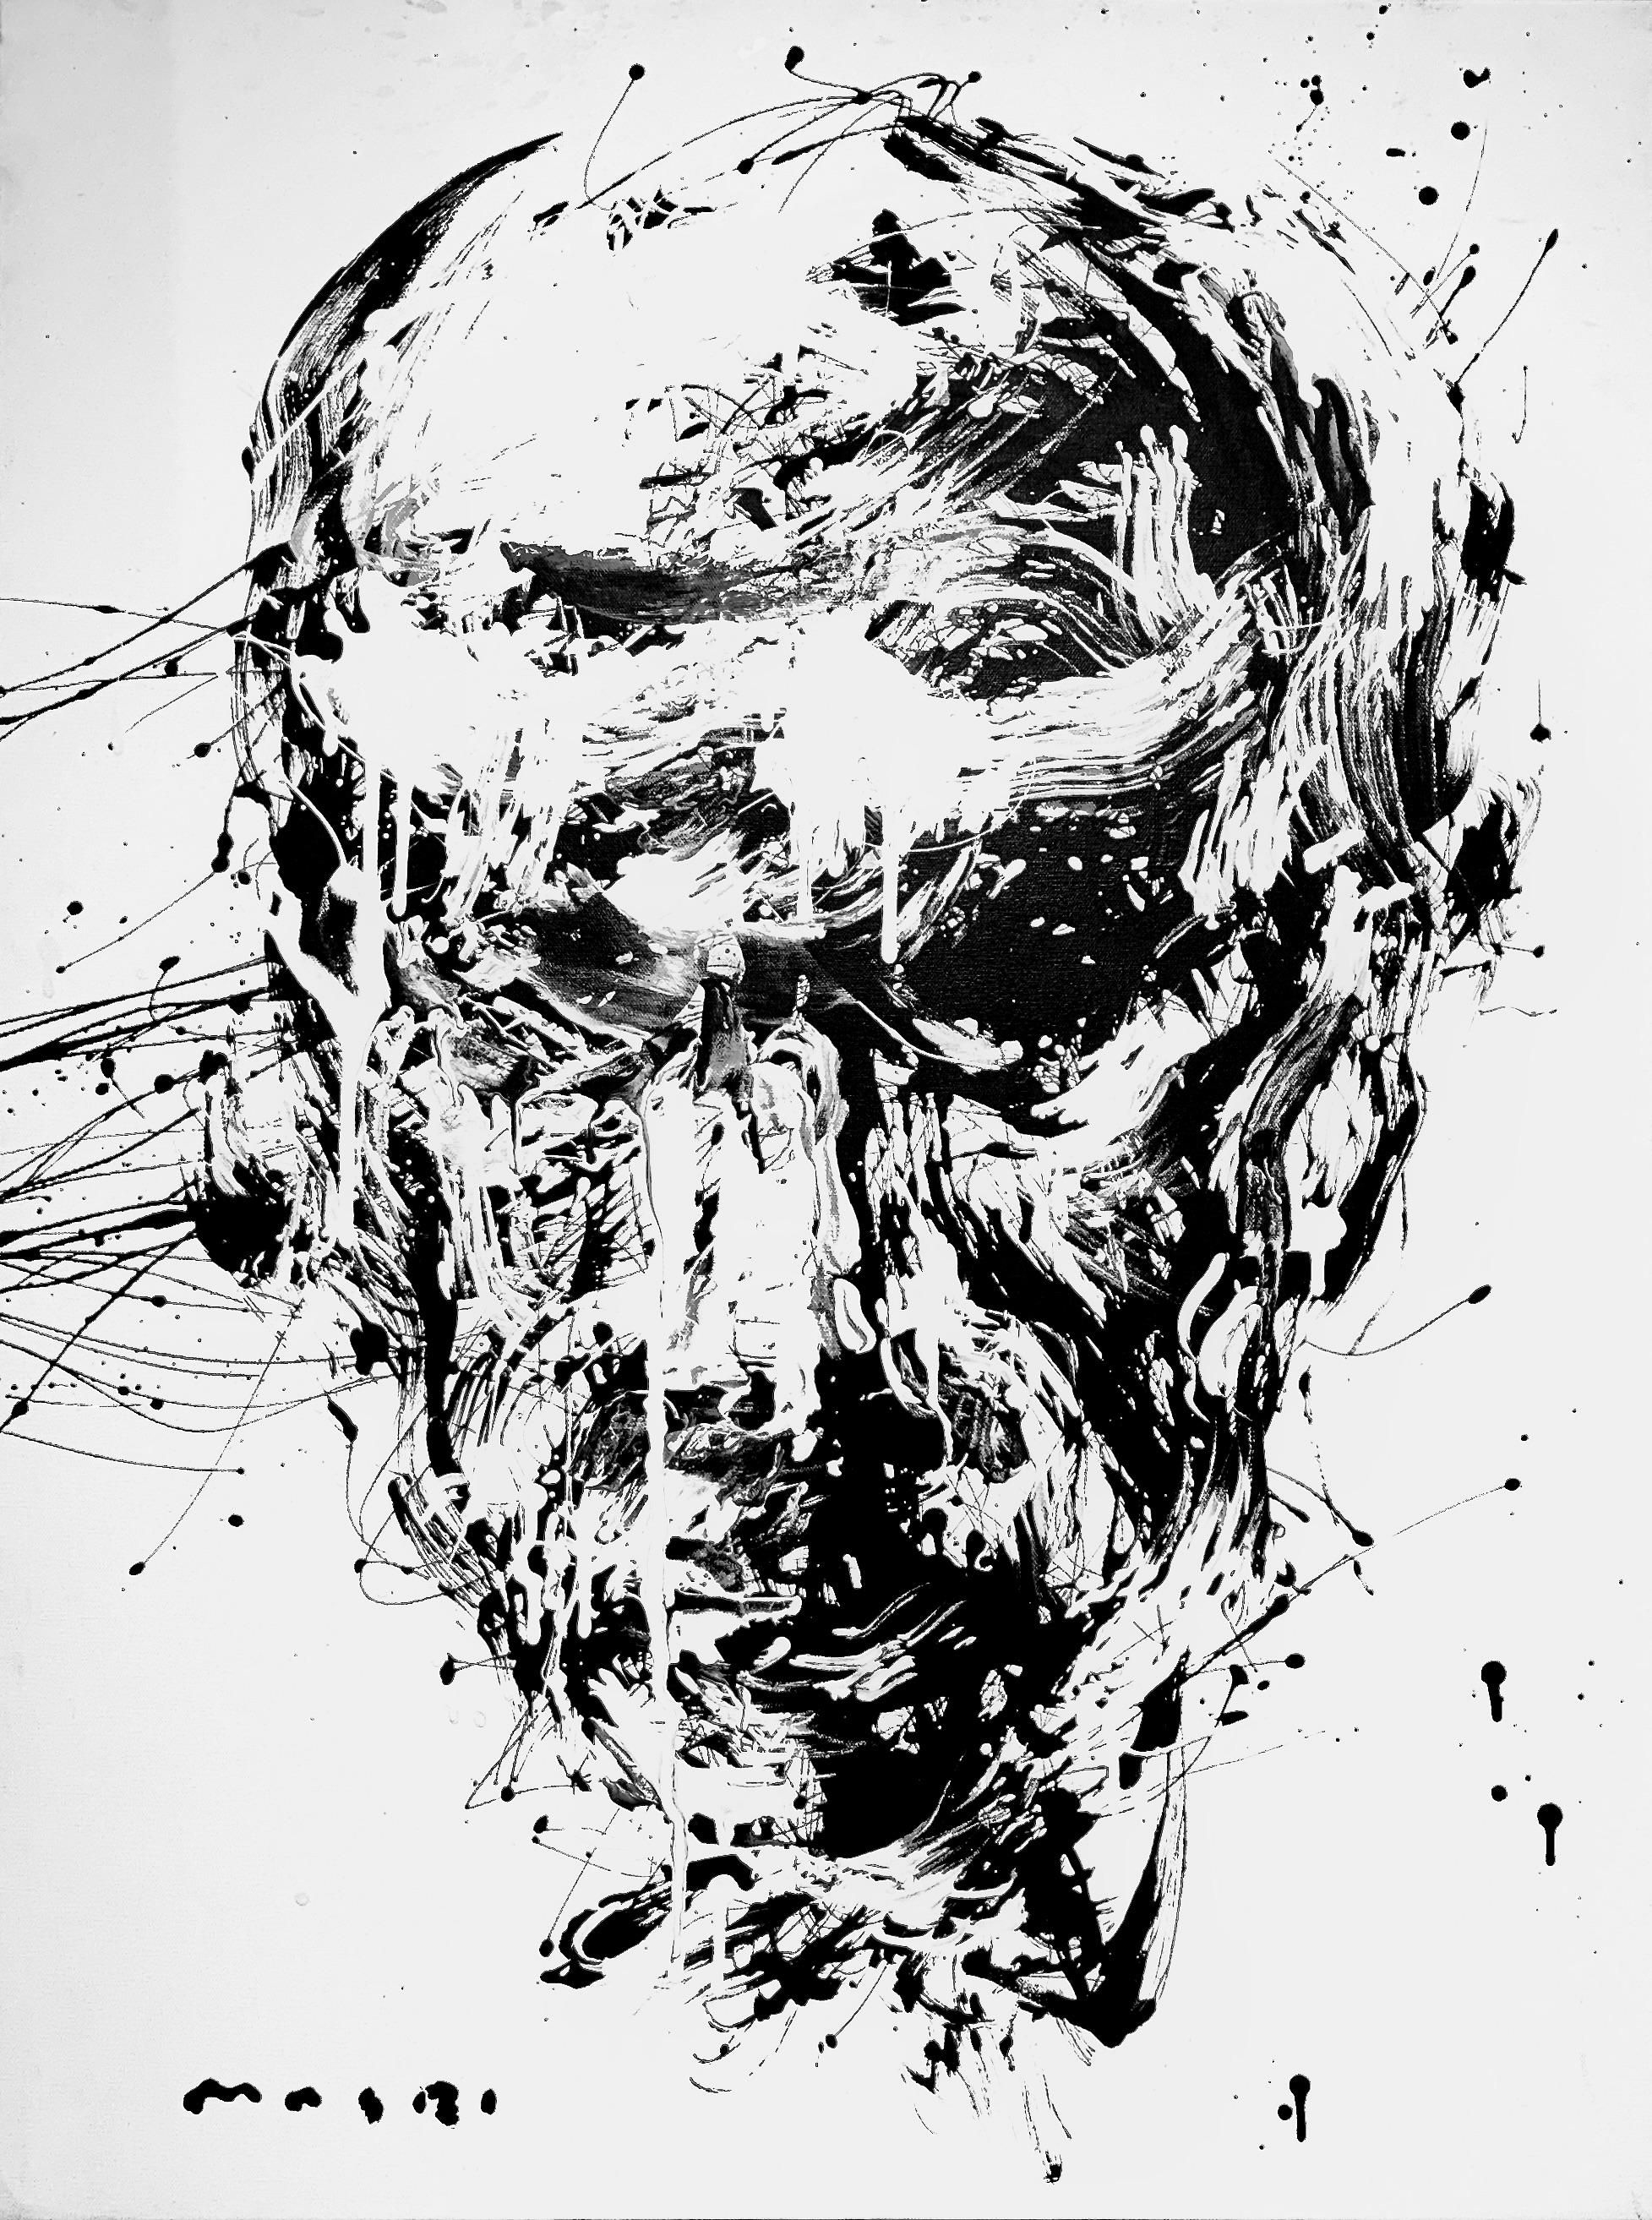 Masri Hayssam Portrait Painting - 'Stoic' by Masri - Black and White Abstract Portrait - Mixed Media Painting